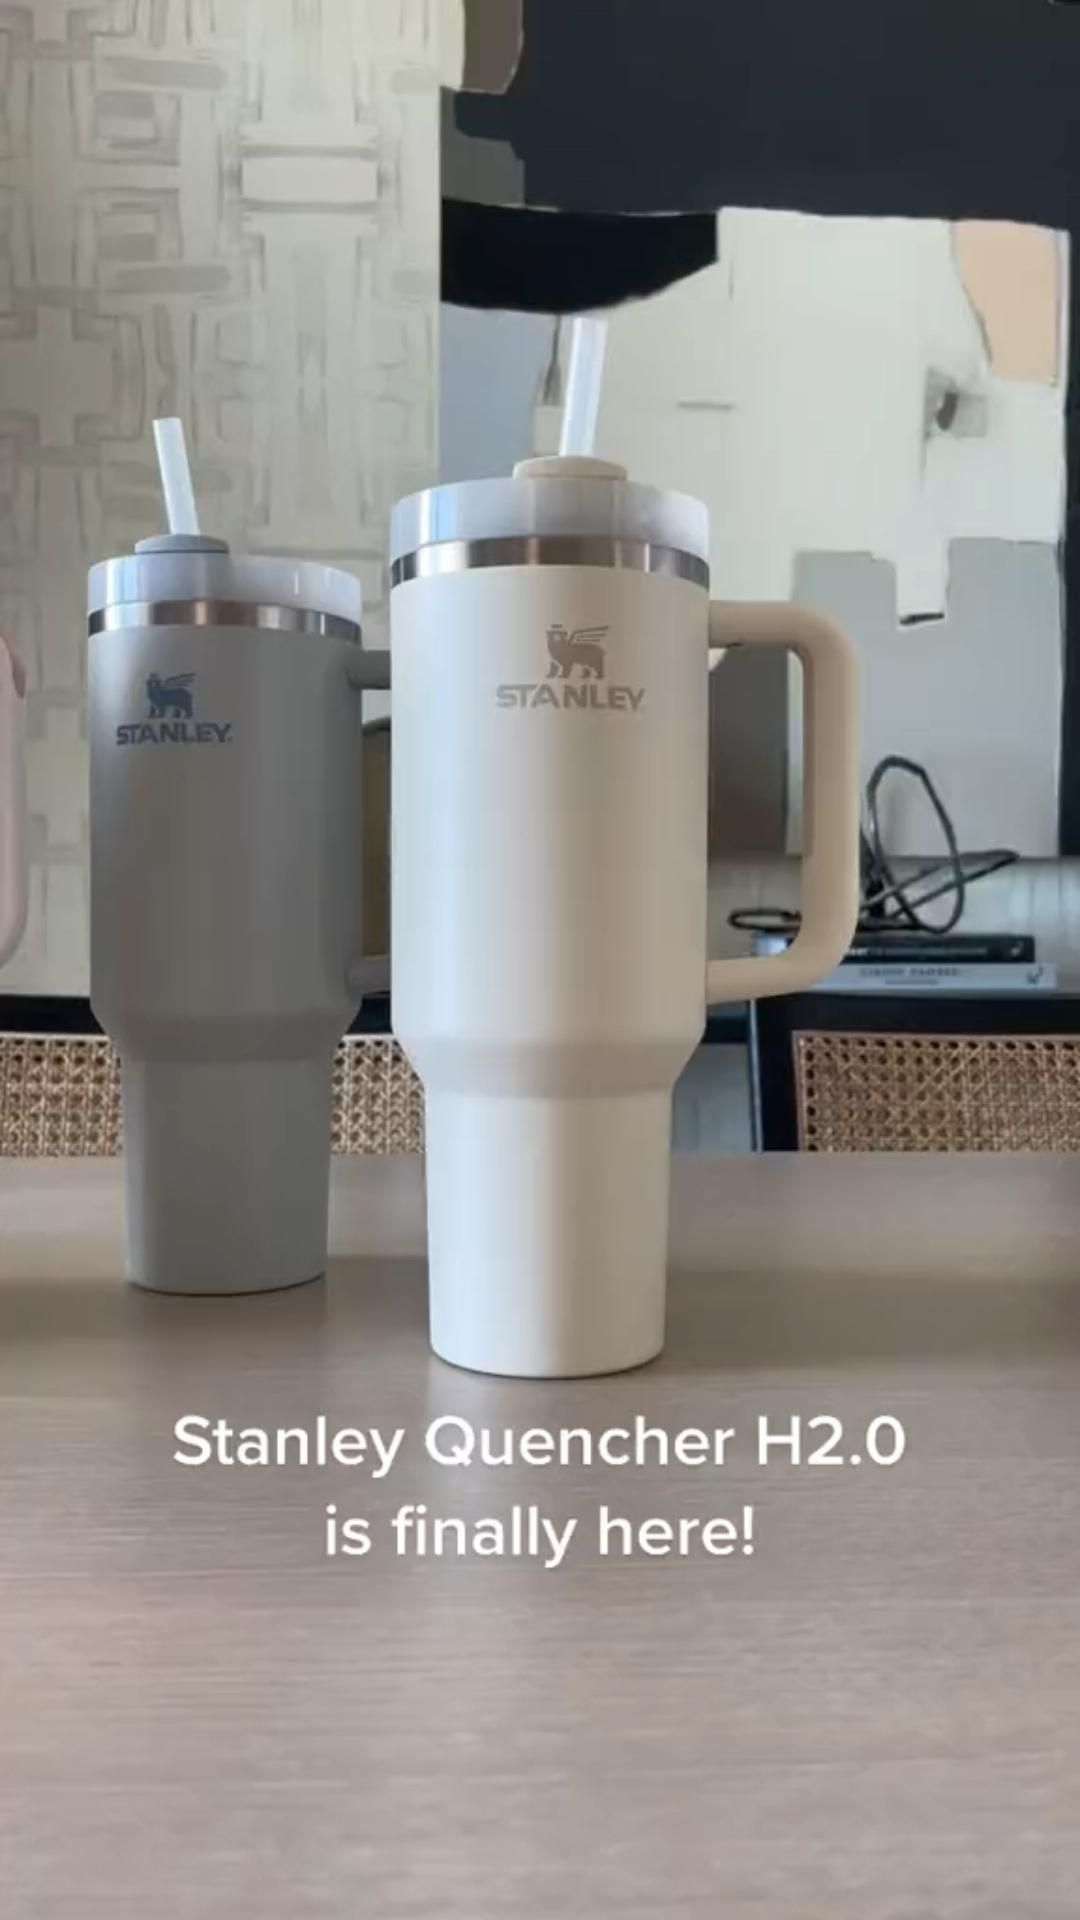 Acero Inoxidable Stanley Quencher H2.0 - Stylish Stanley Tumbler